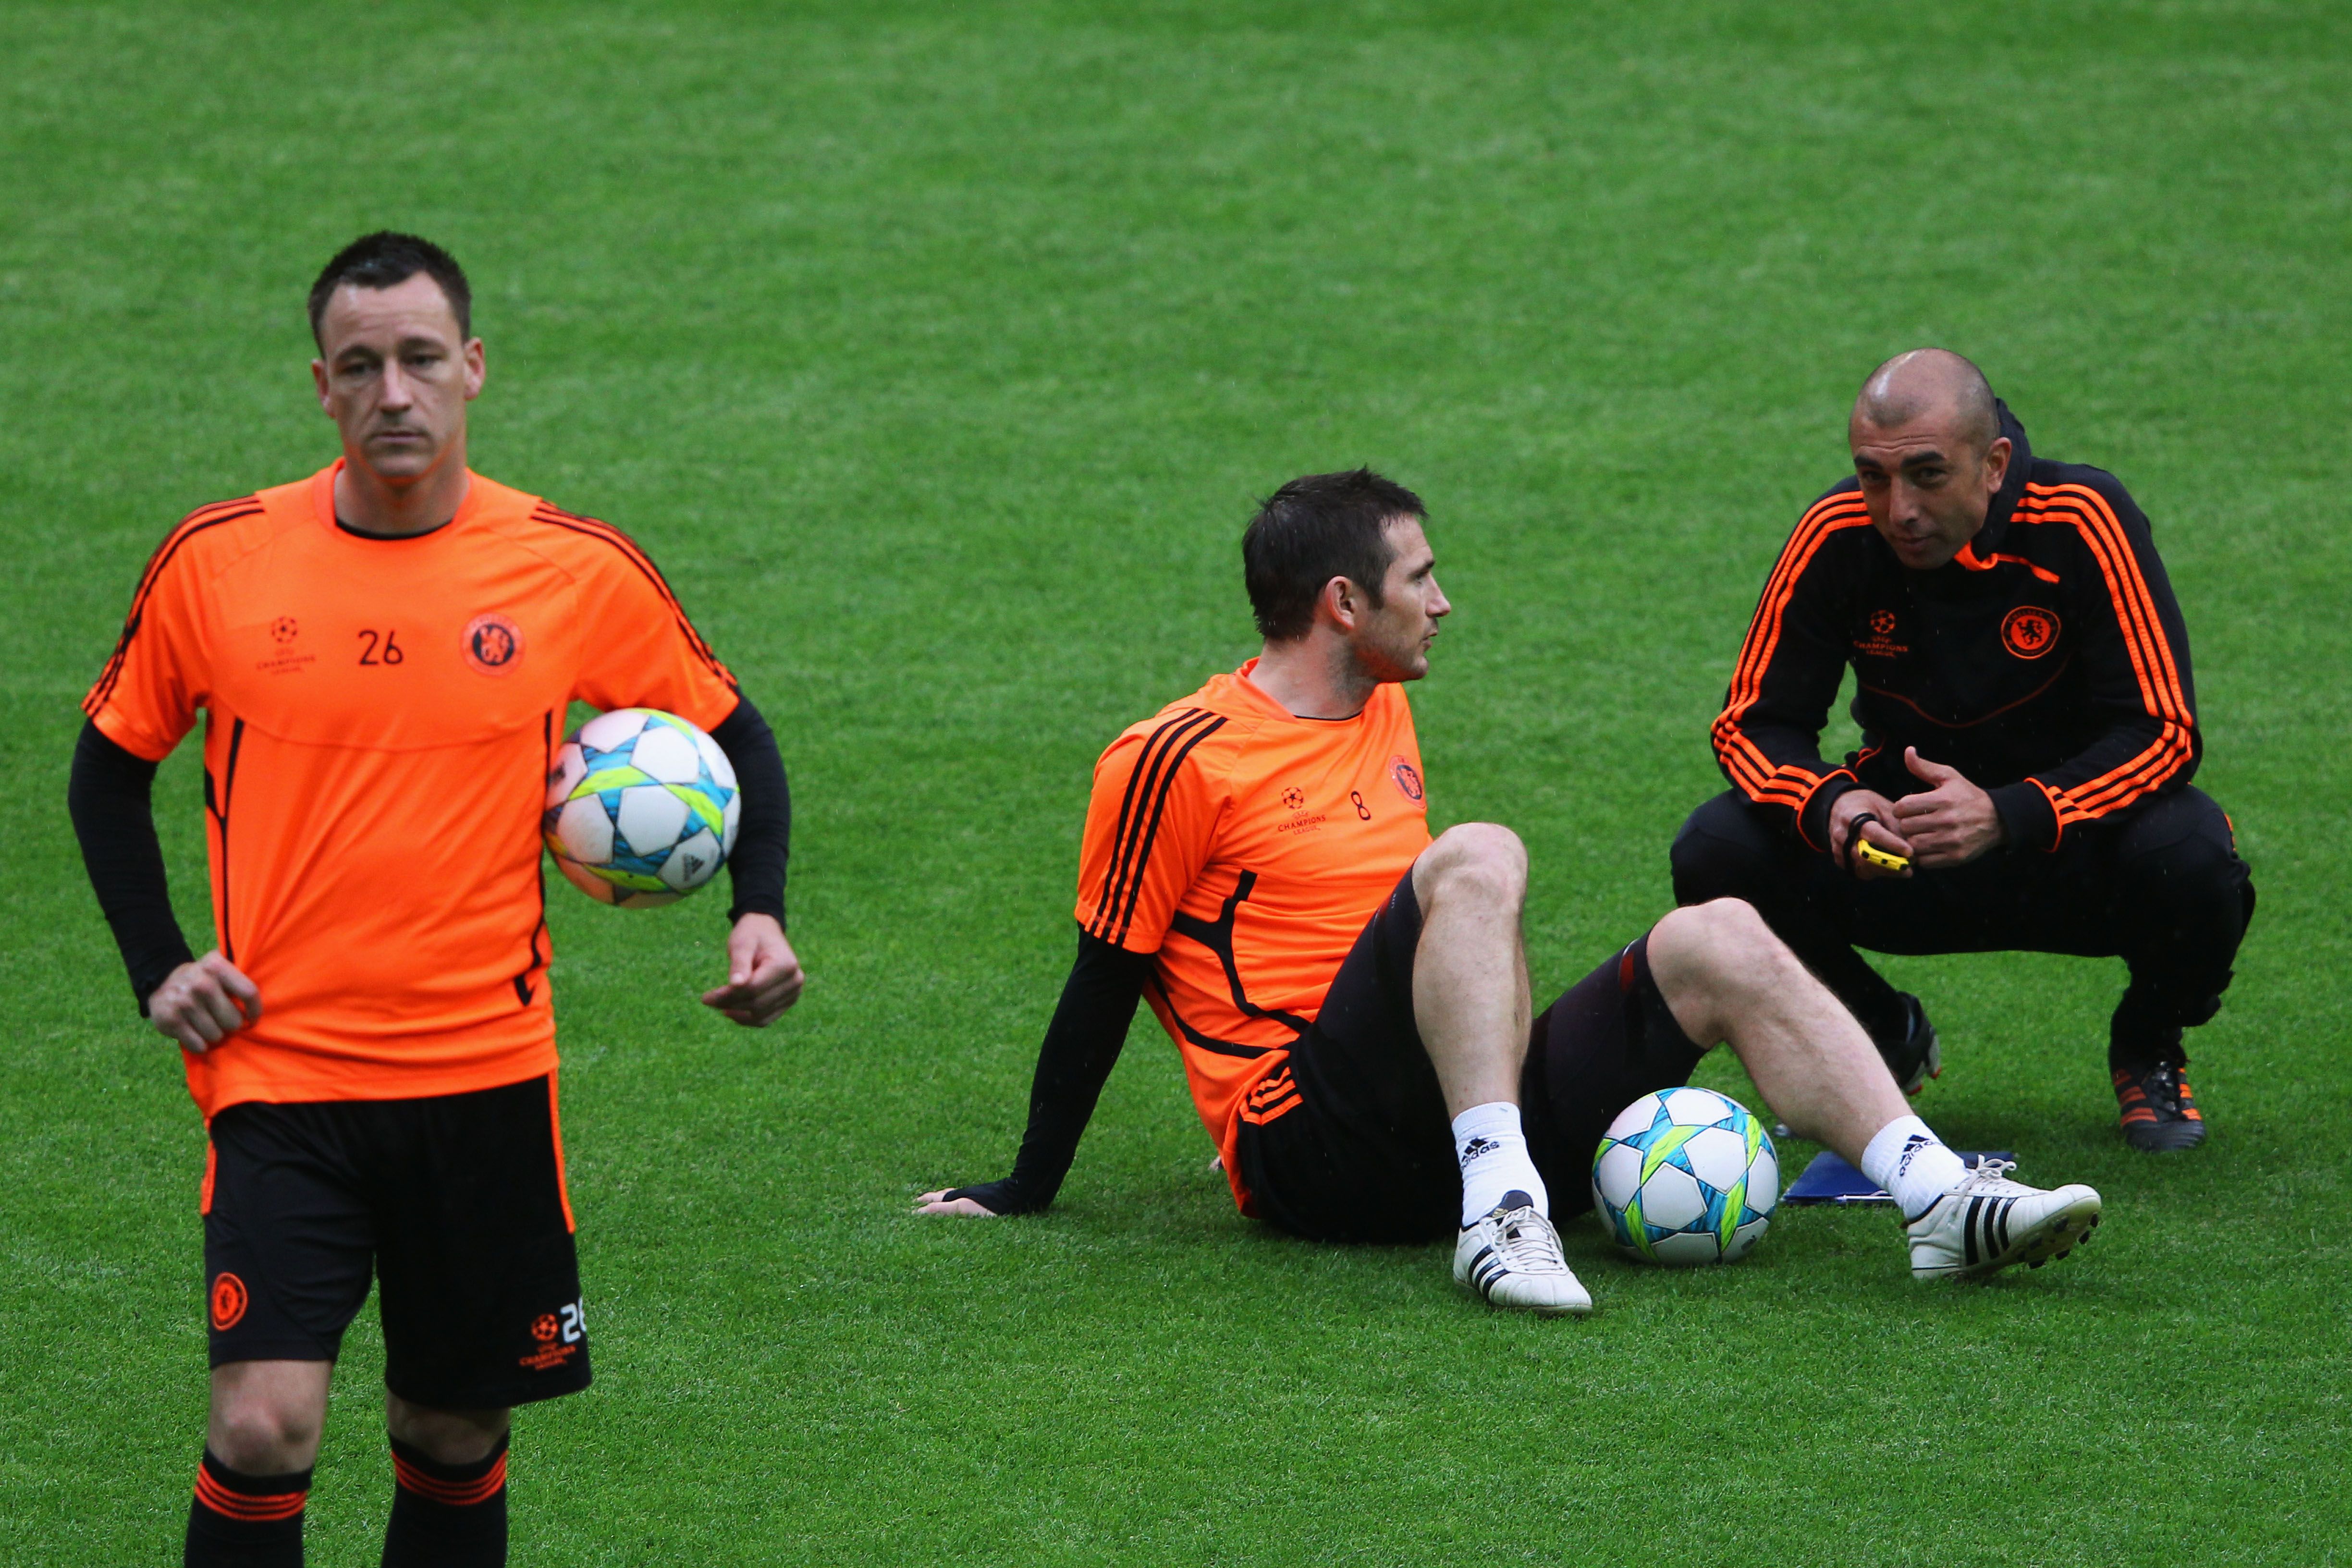 Chelsea training 2012 UCL final